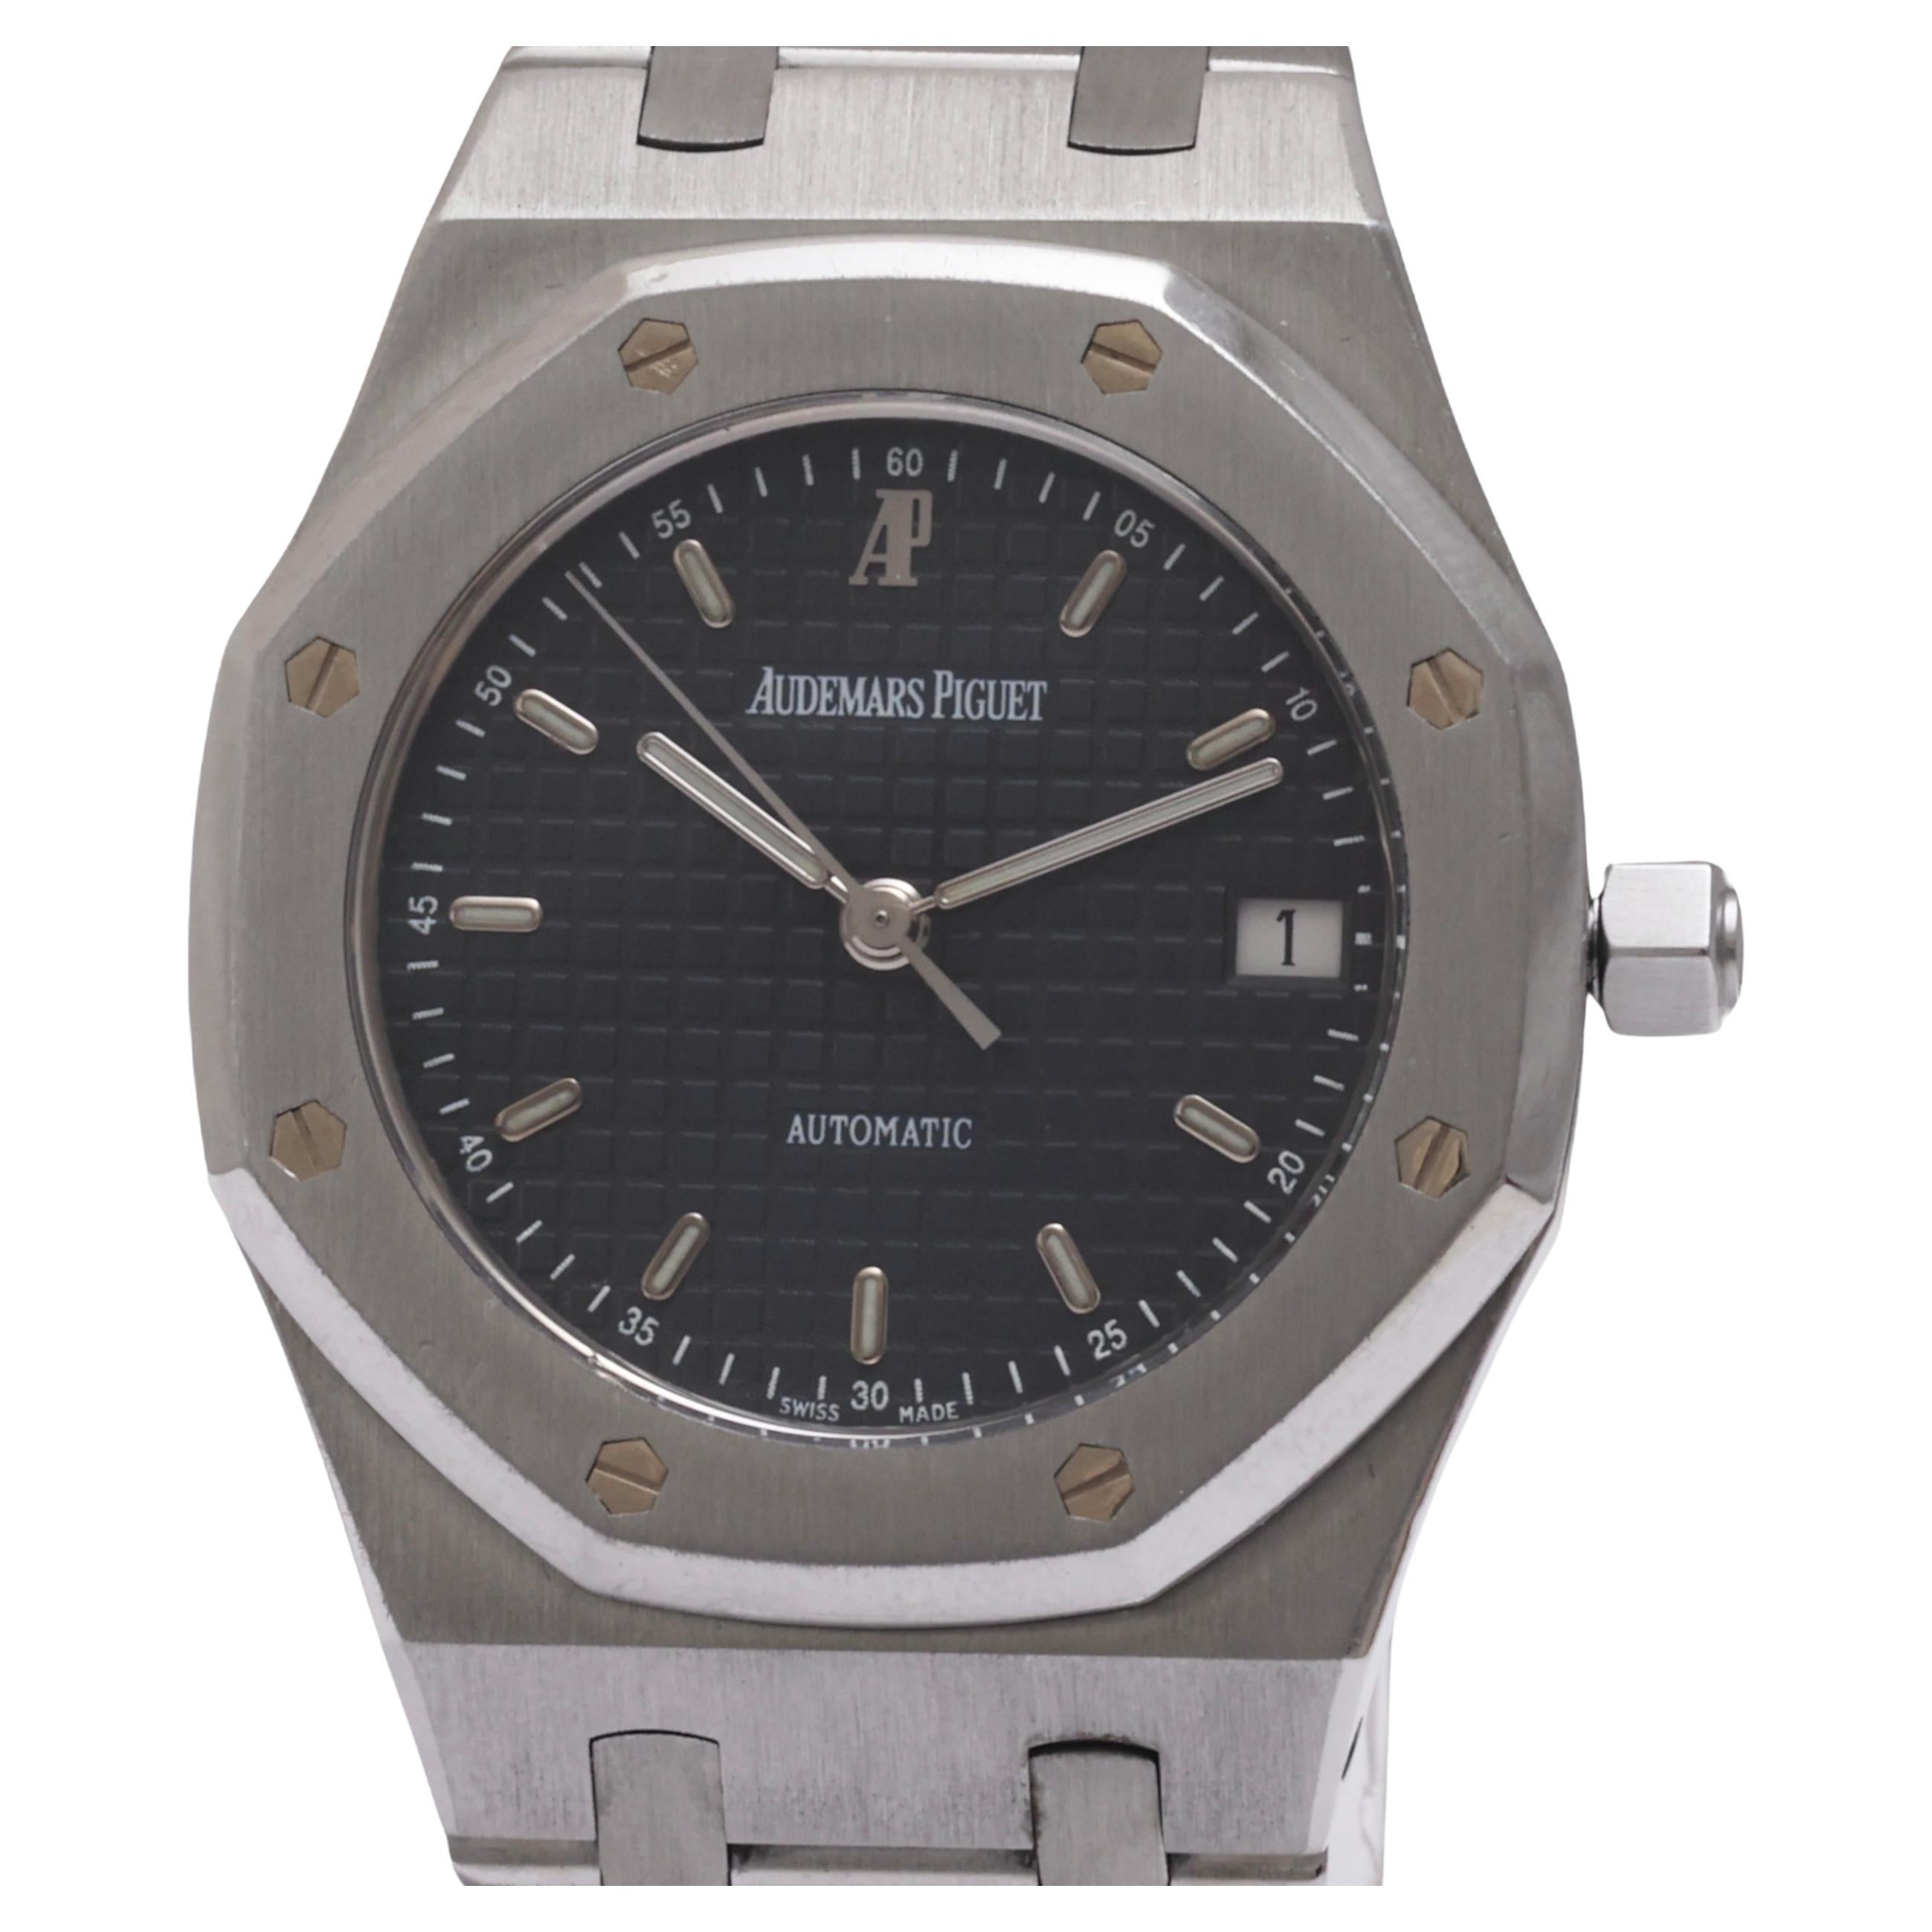 Audemars Piguet, Automatic, Royal Oak, Stainless Steel, Collector Ref. 14790ST For Sale